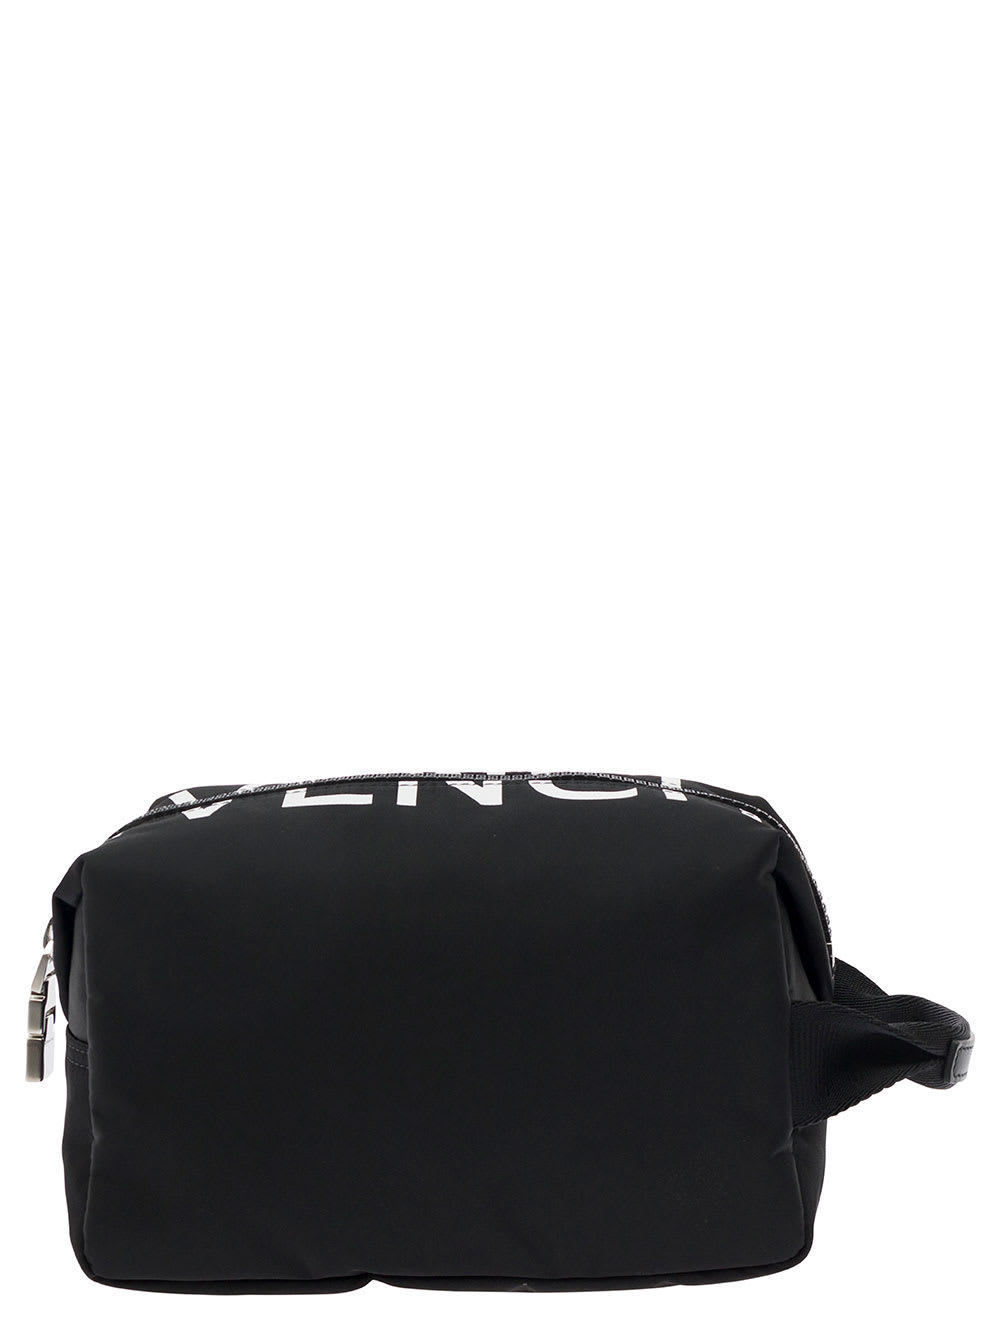 Givenchy G-zip Toilet Pouch In Black